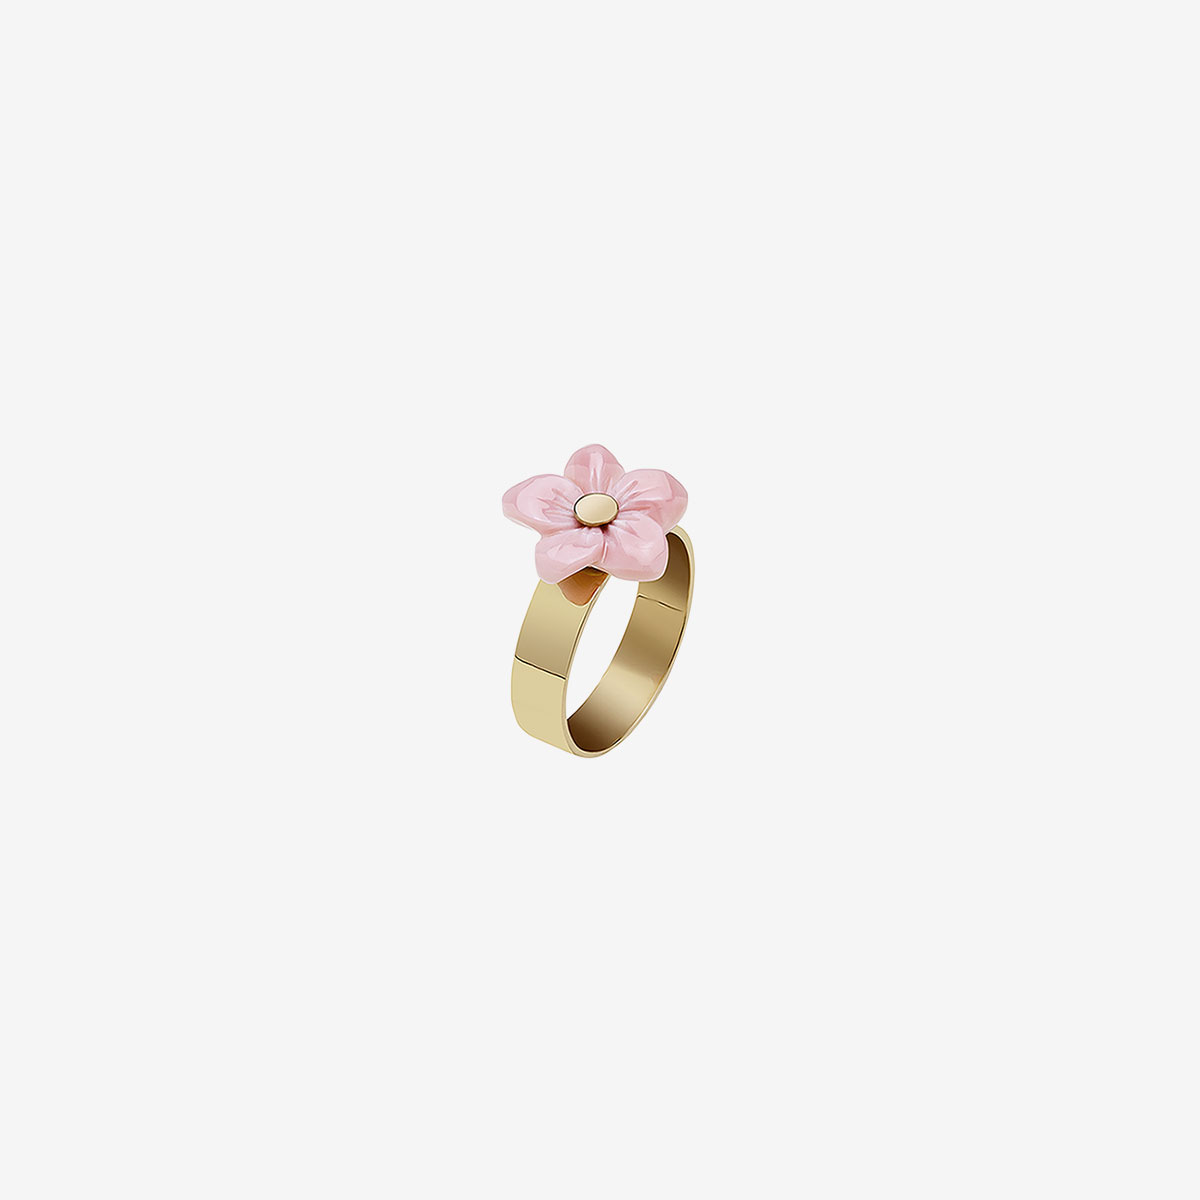 Enai handmade ring in 9k or 18k gold and pink shell designed by Belen Bajo